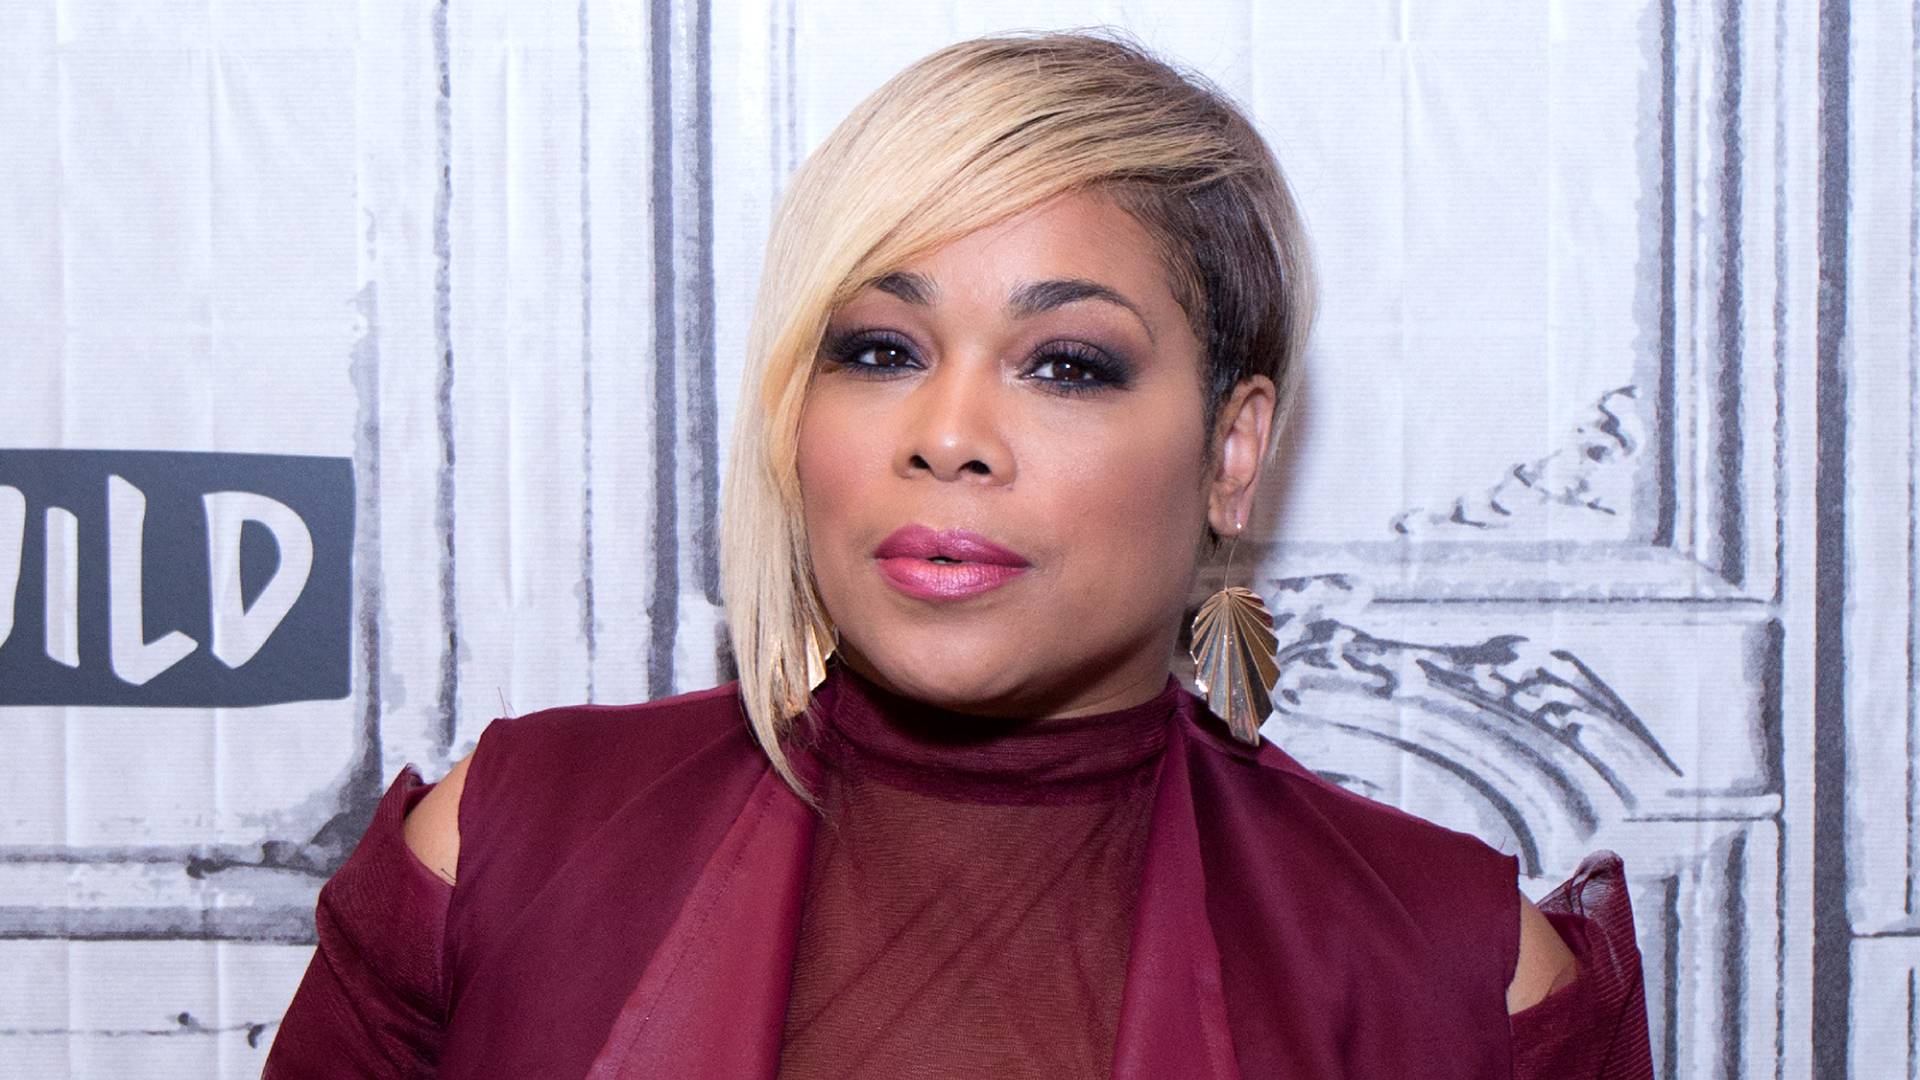 Tionne "T-Boz" Watkins visits Build Presents to discuss her new book "A Sick Life: TLC 'n Me: Stories From On And Off The Stage" at Build Studio on September 13, 2017 in New York City.